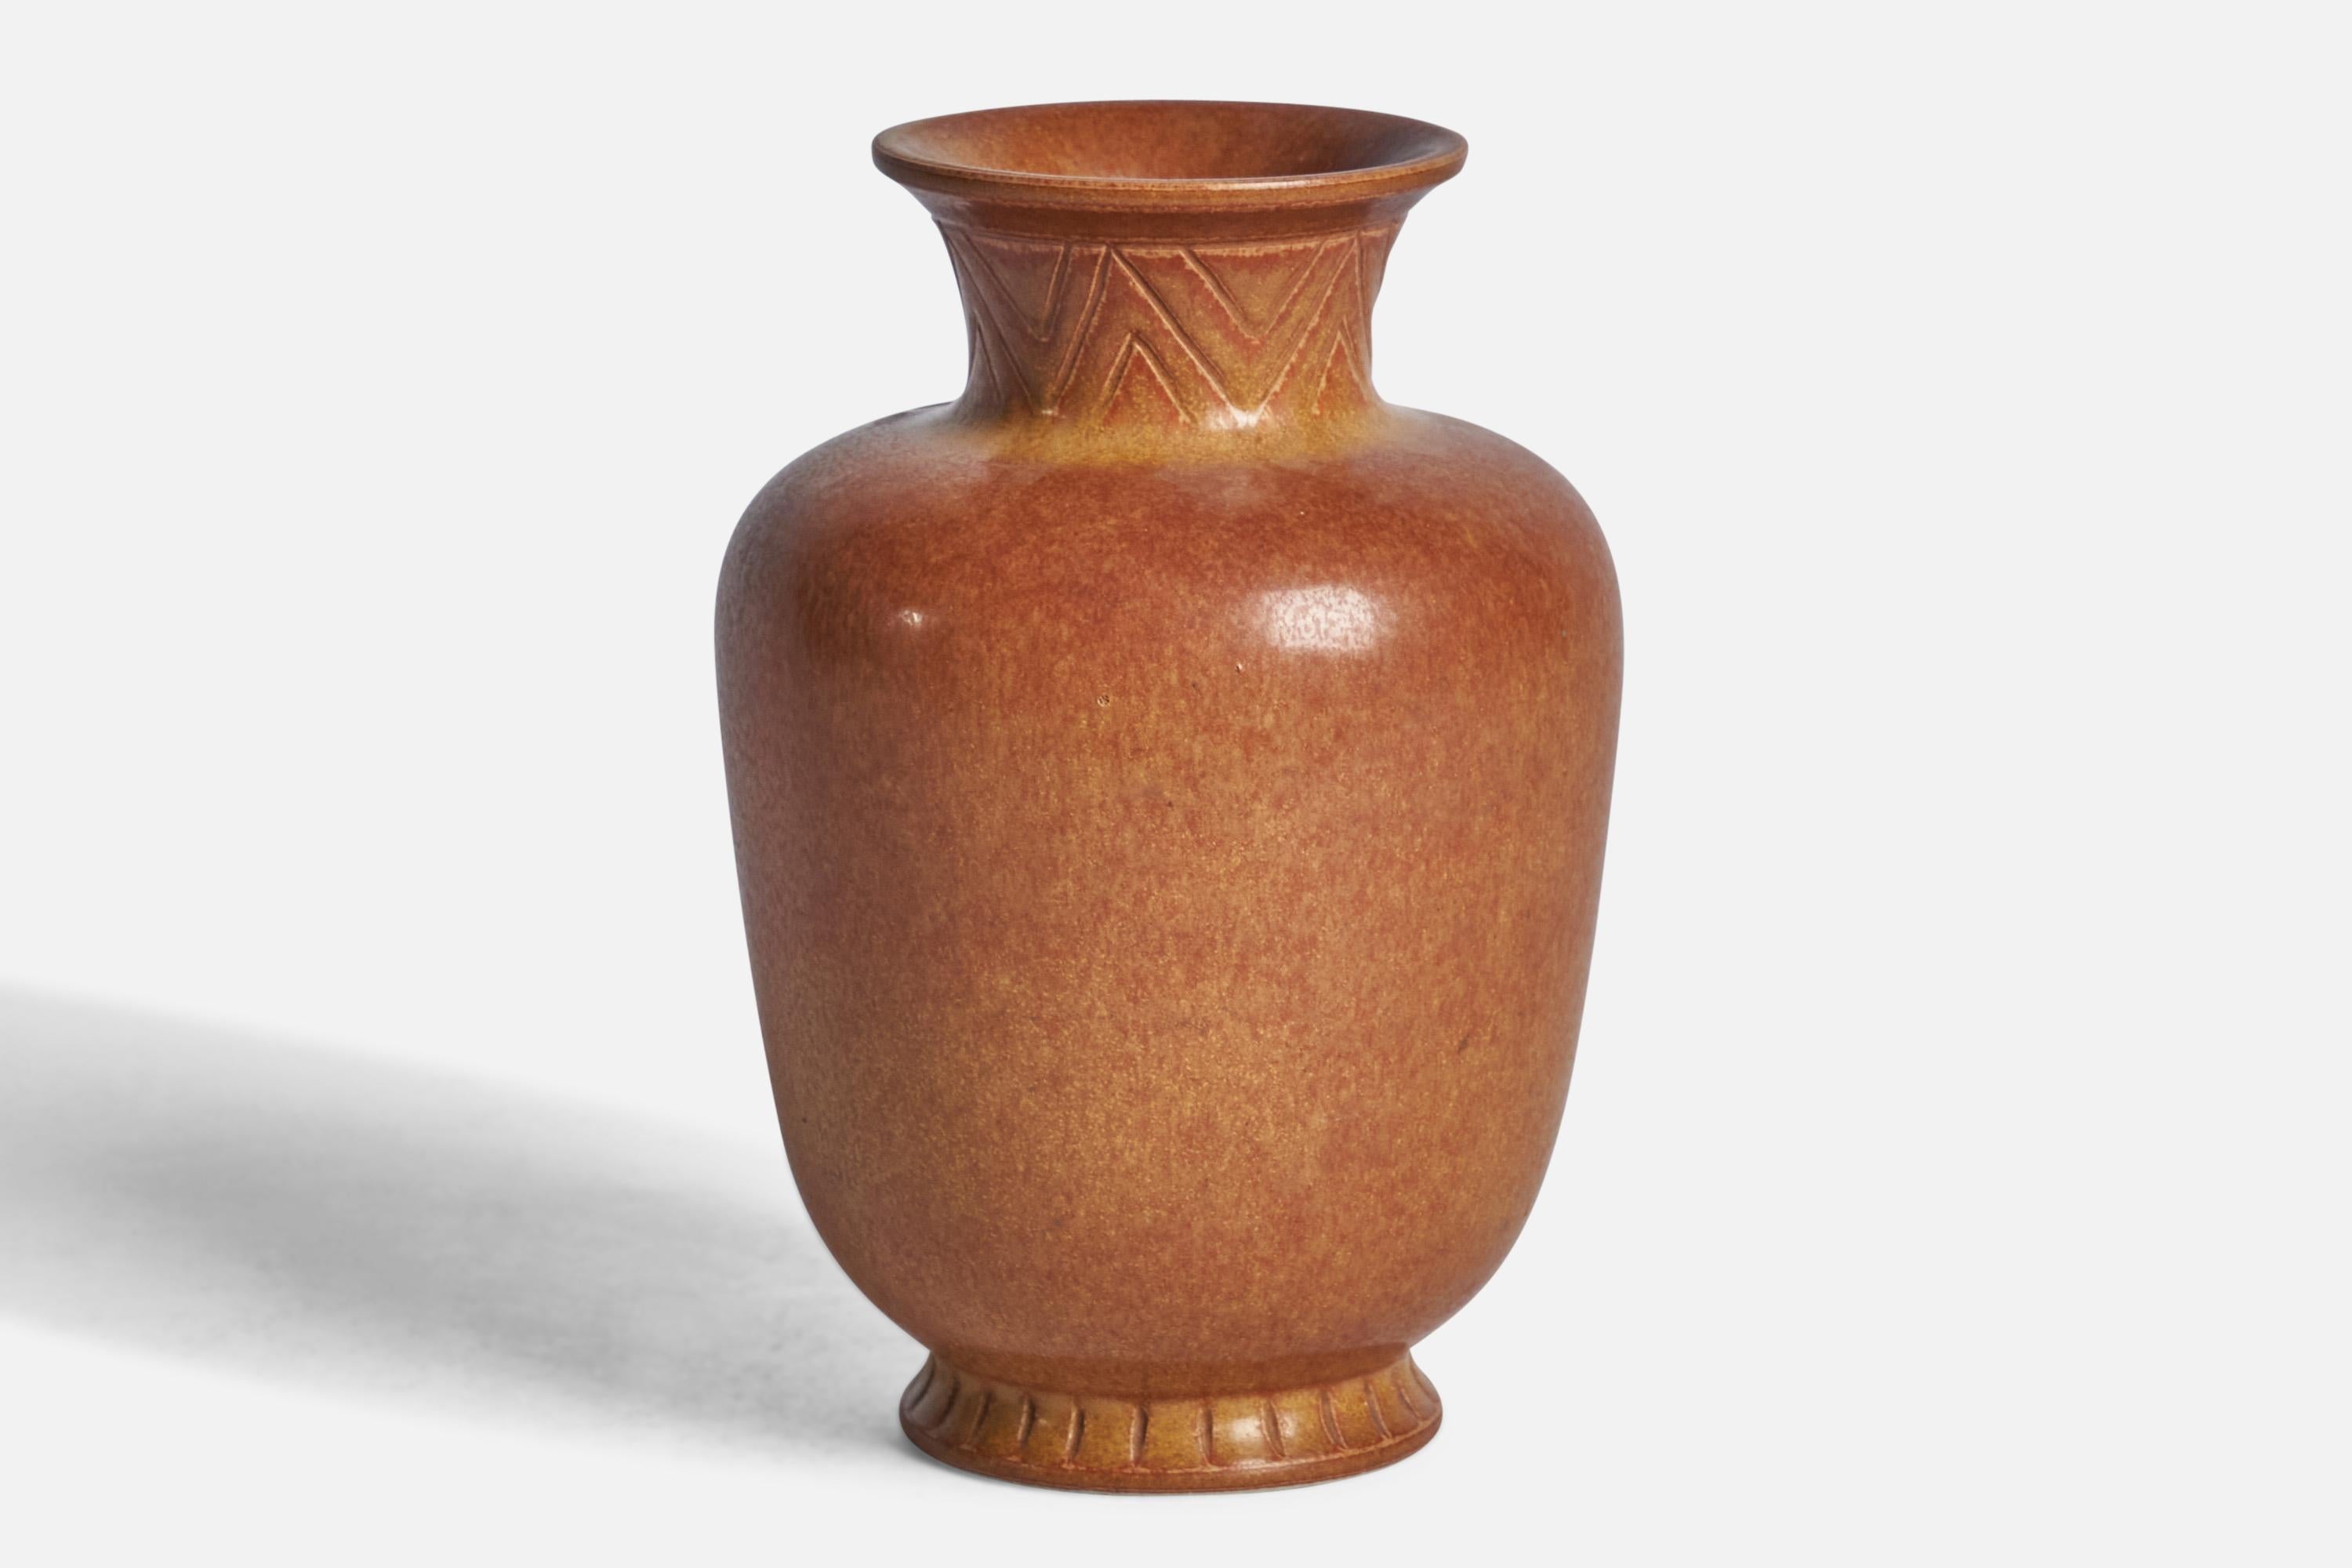 A brown-glazed stoneware vase designed by Gunnar Nylund and produced by Rörstrand, Sweden, 1940s.